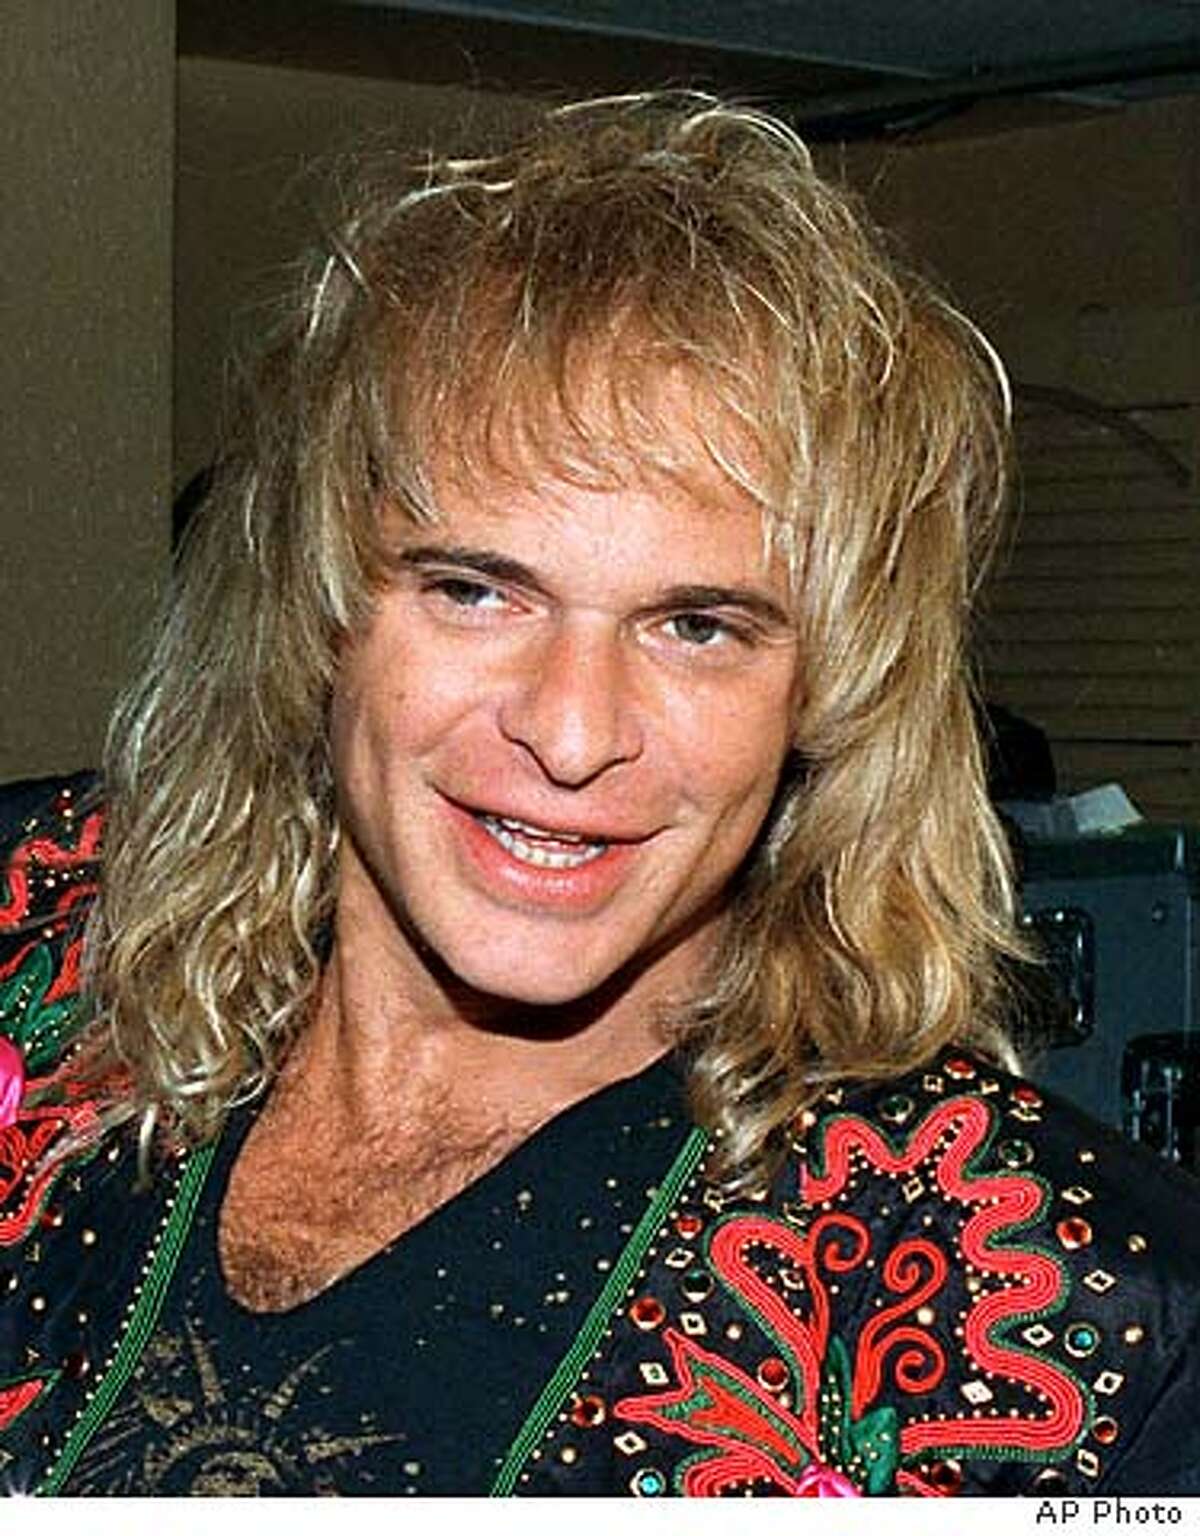 ROTH1-C-08MAY02-HM-AP --- Former Van Halen singer David Lee Roth is shown in this 1988 photo. Roth may seek punitive damages in a $5 million lawsuit alleging his insurance companies failed to fully reimburse him for damage to his Pasadena, Calif., home from a 1994 earthquake. On Thursday, Nov. 7, 1996, a judge ruled against a motion filed by RLI Insurance Co., one of three companies named in the suit, to eliminate the possibility of punitive damages being awarded, but left open the possibility he might later reversehimself. (AP Photo/) (BY /ASSOCIATED PRESS)